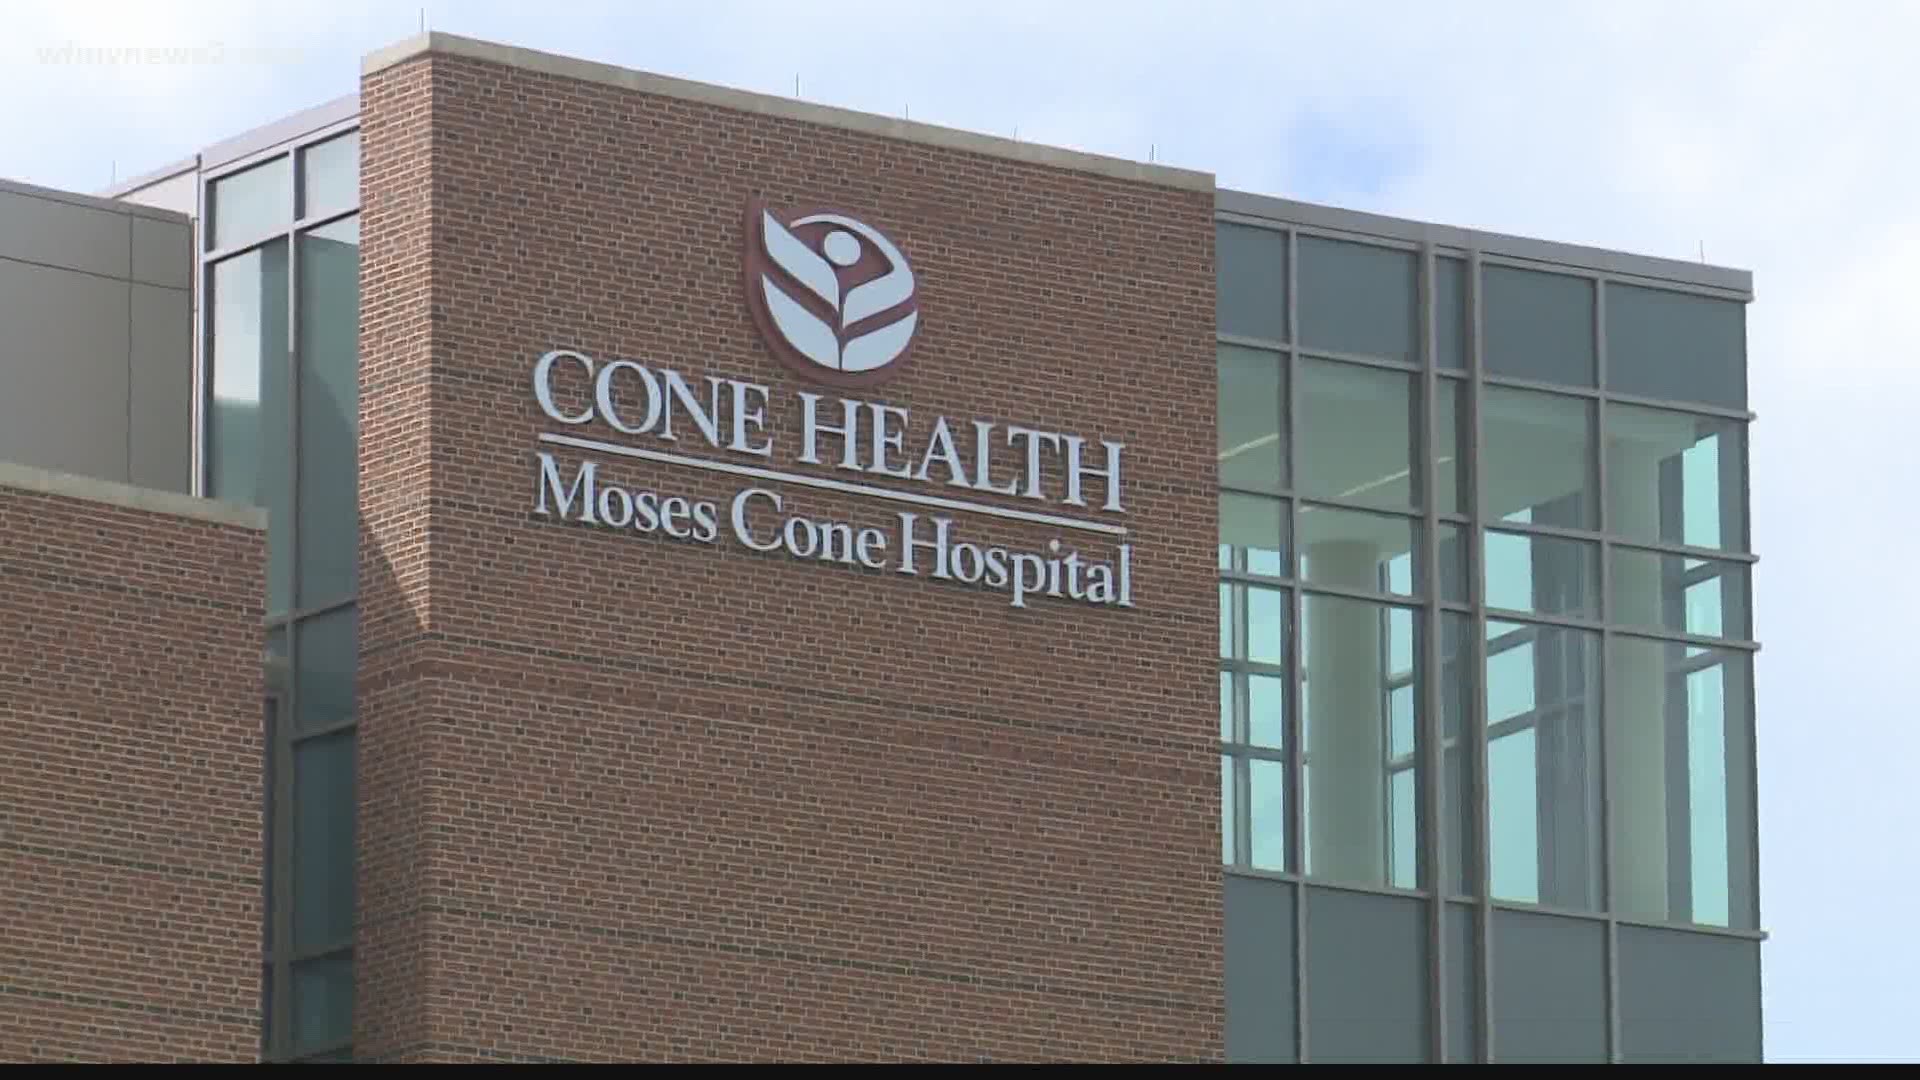 The first shipments of the COVID-19 vaccine are making their way around the Triad. Cone Health officials say they expect doses on Thursday.